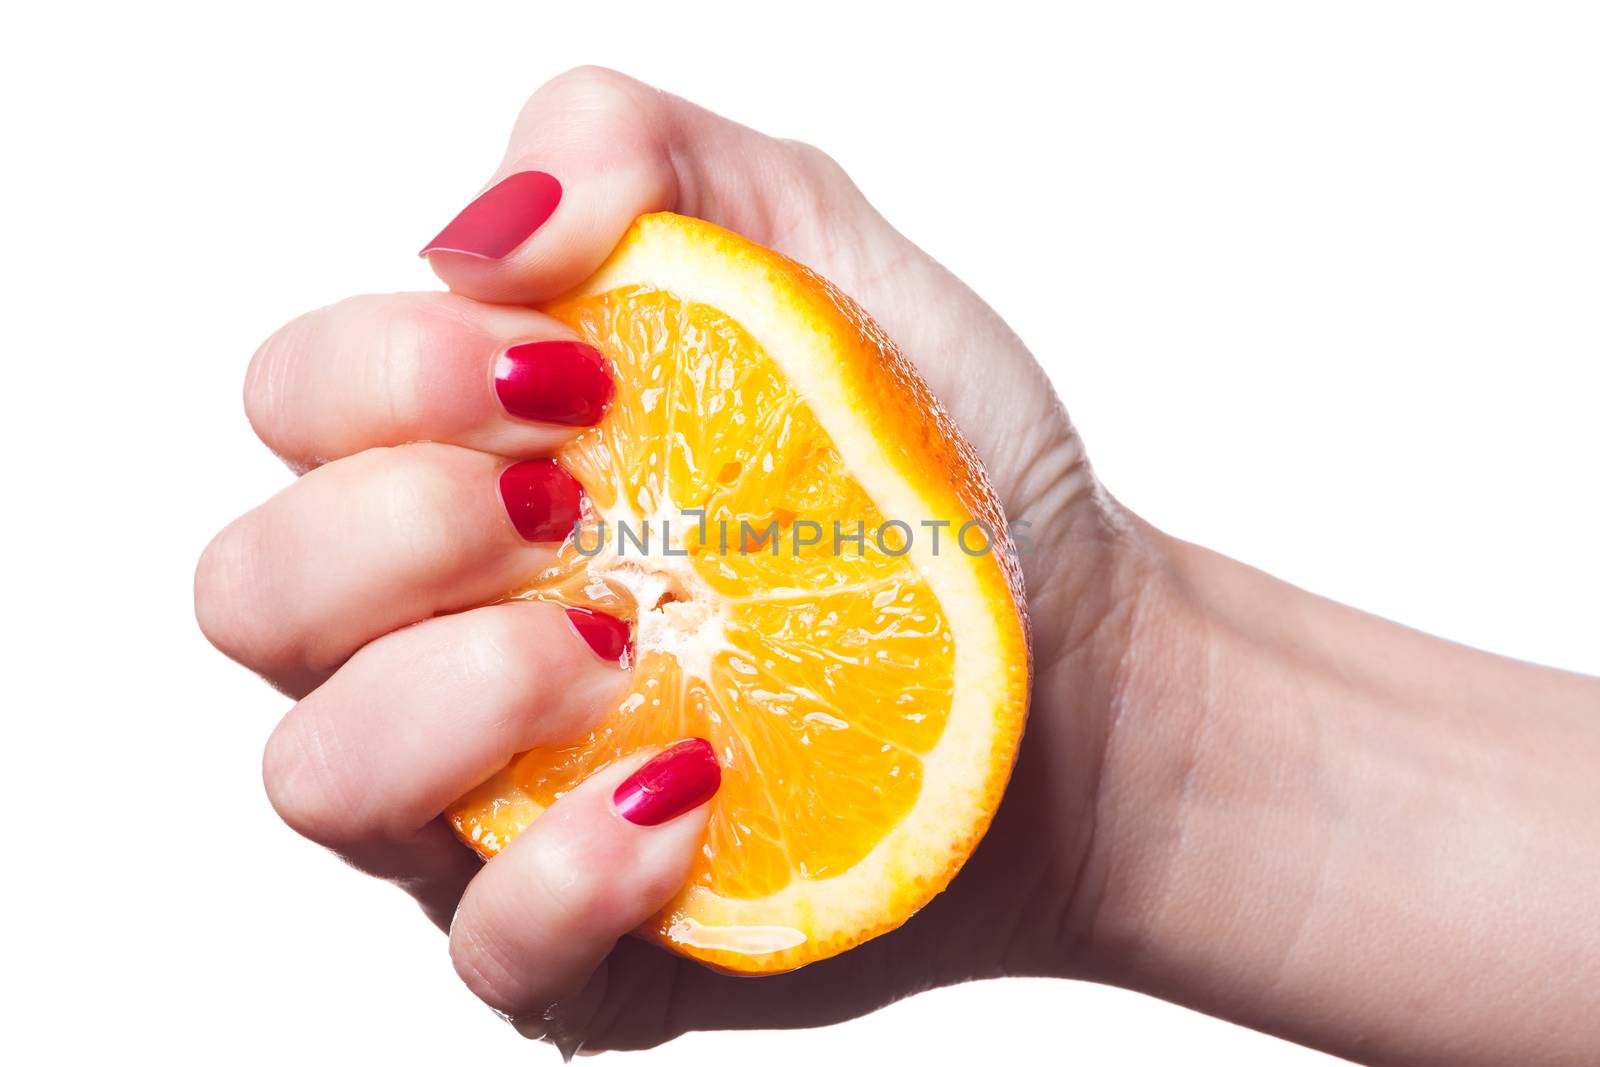 Hand with manicured nails touch an orange on white by juniart